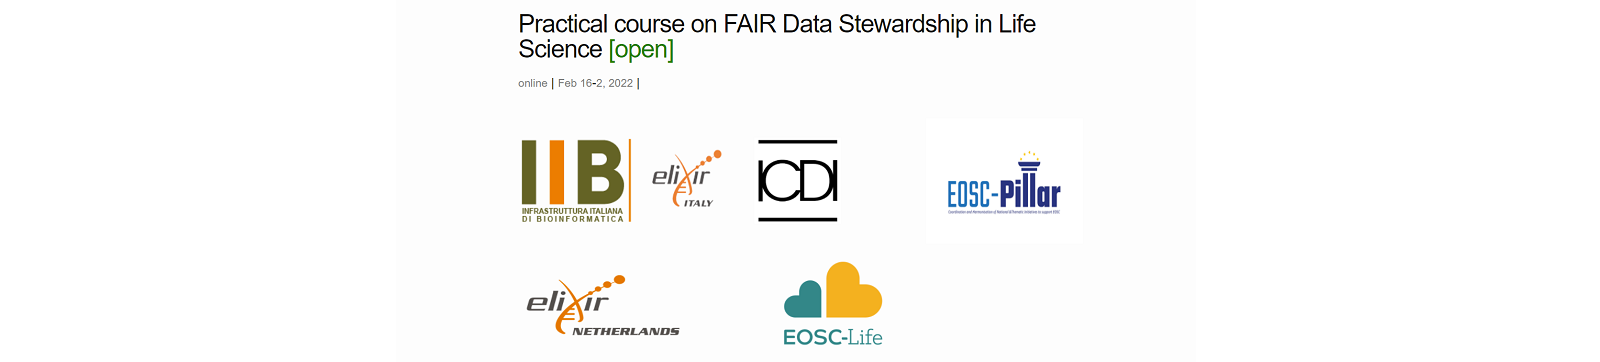 Practical course on FAIR Data Stewardship in Life Science